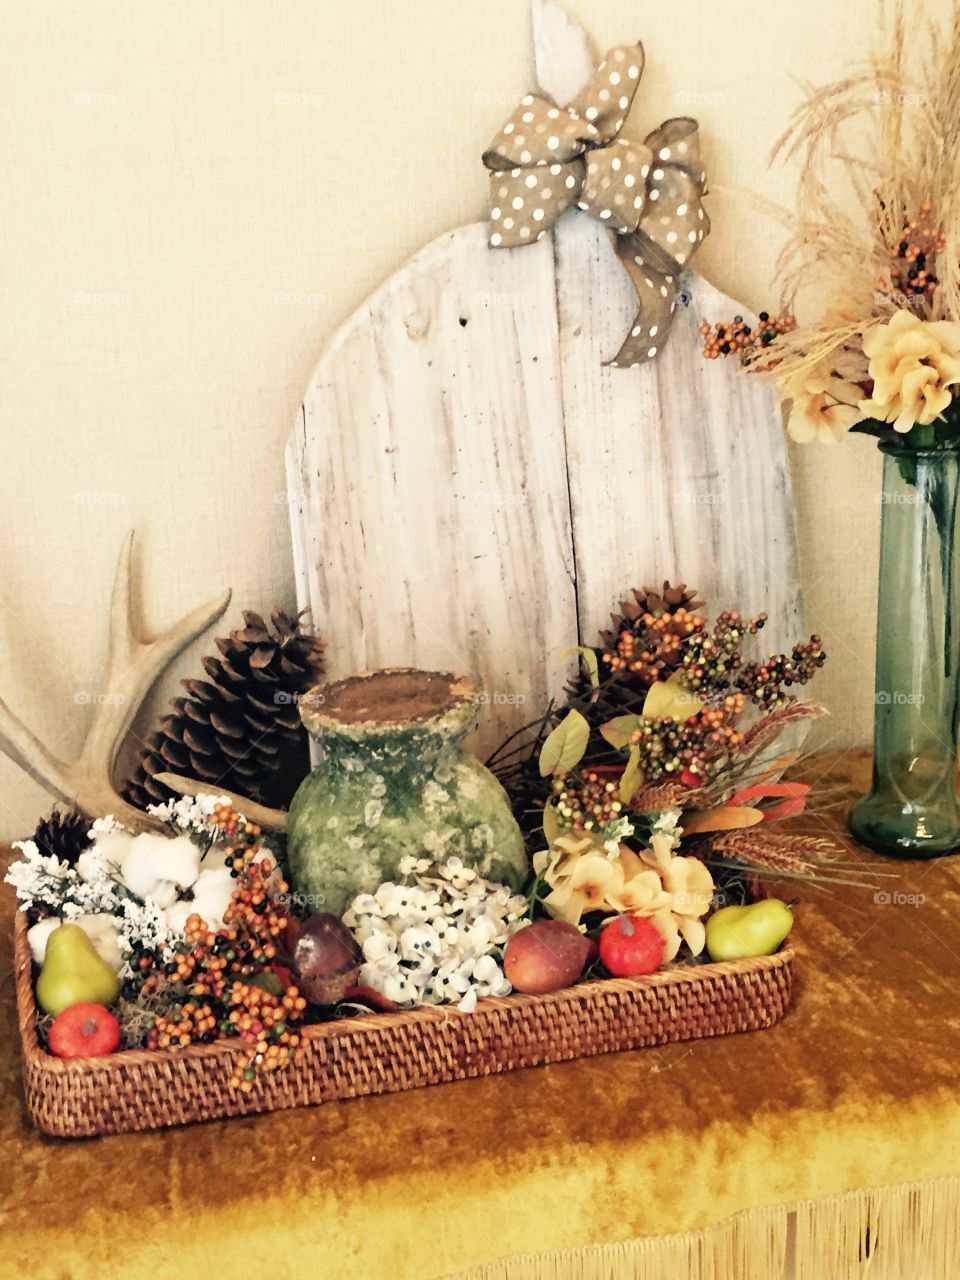 Fall decorations including, fall flowers, large pine cones, teeny pumpkins, making a gorgeous display in an oblong wicker basket. 